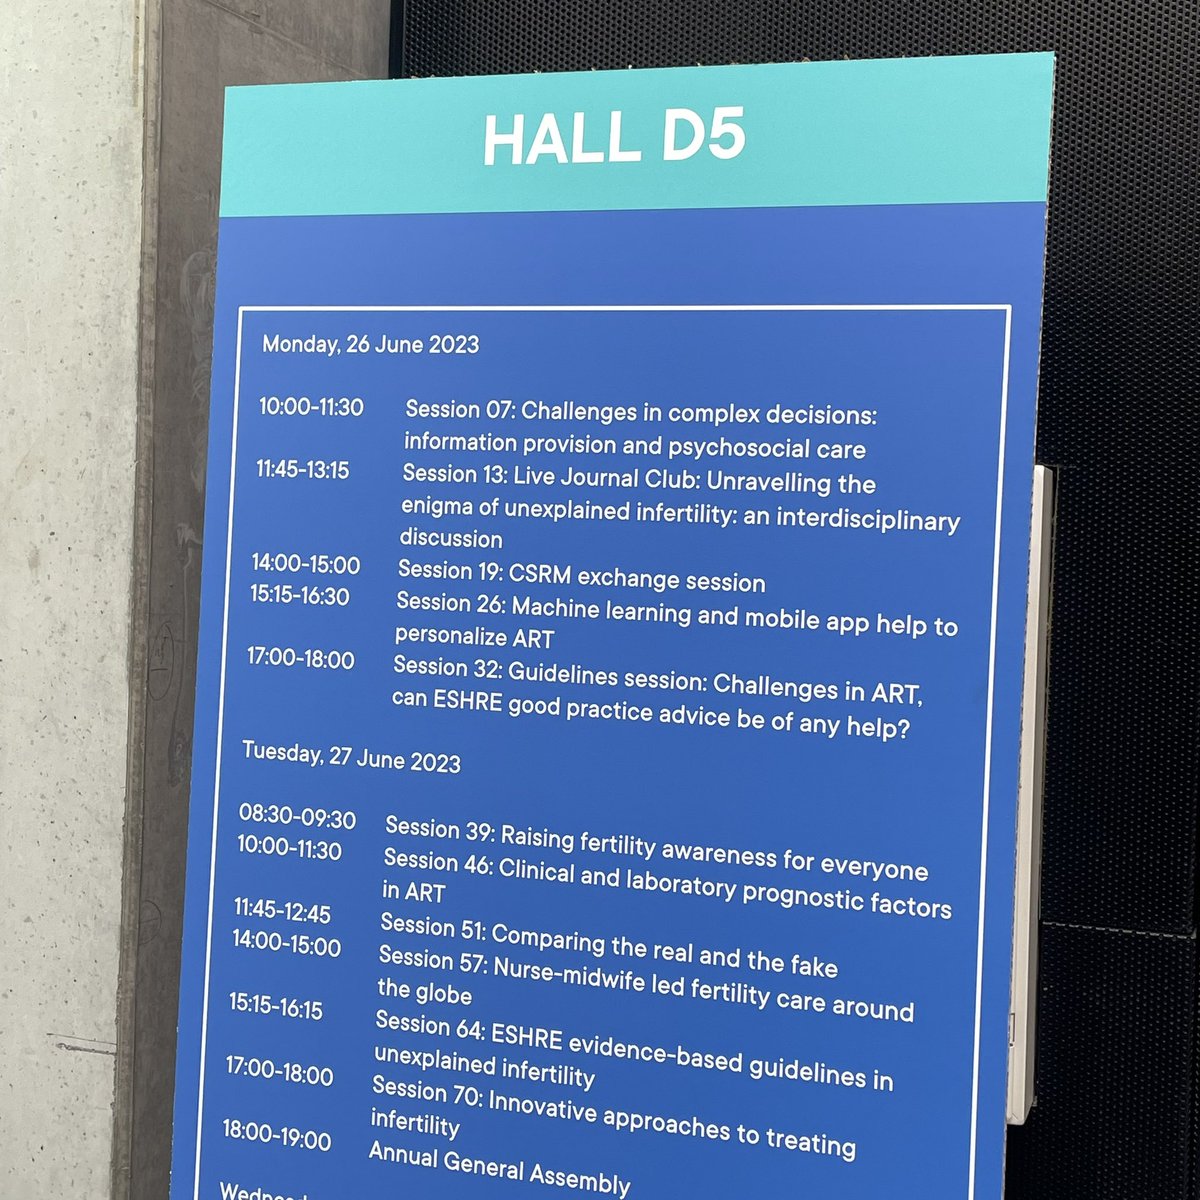 🚨Most anticipated session this year organised by the ESHRE journal club team (#ESHREjc) is happening TODAY! 💃🏽🇩🇰

Come discuss unexplained infertility guidelines and much more at Hall D5! 
#ESHRE2023